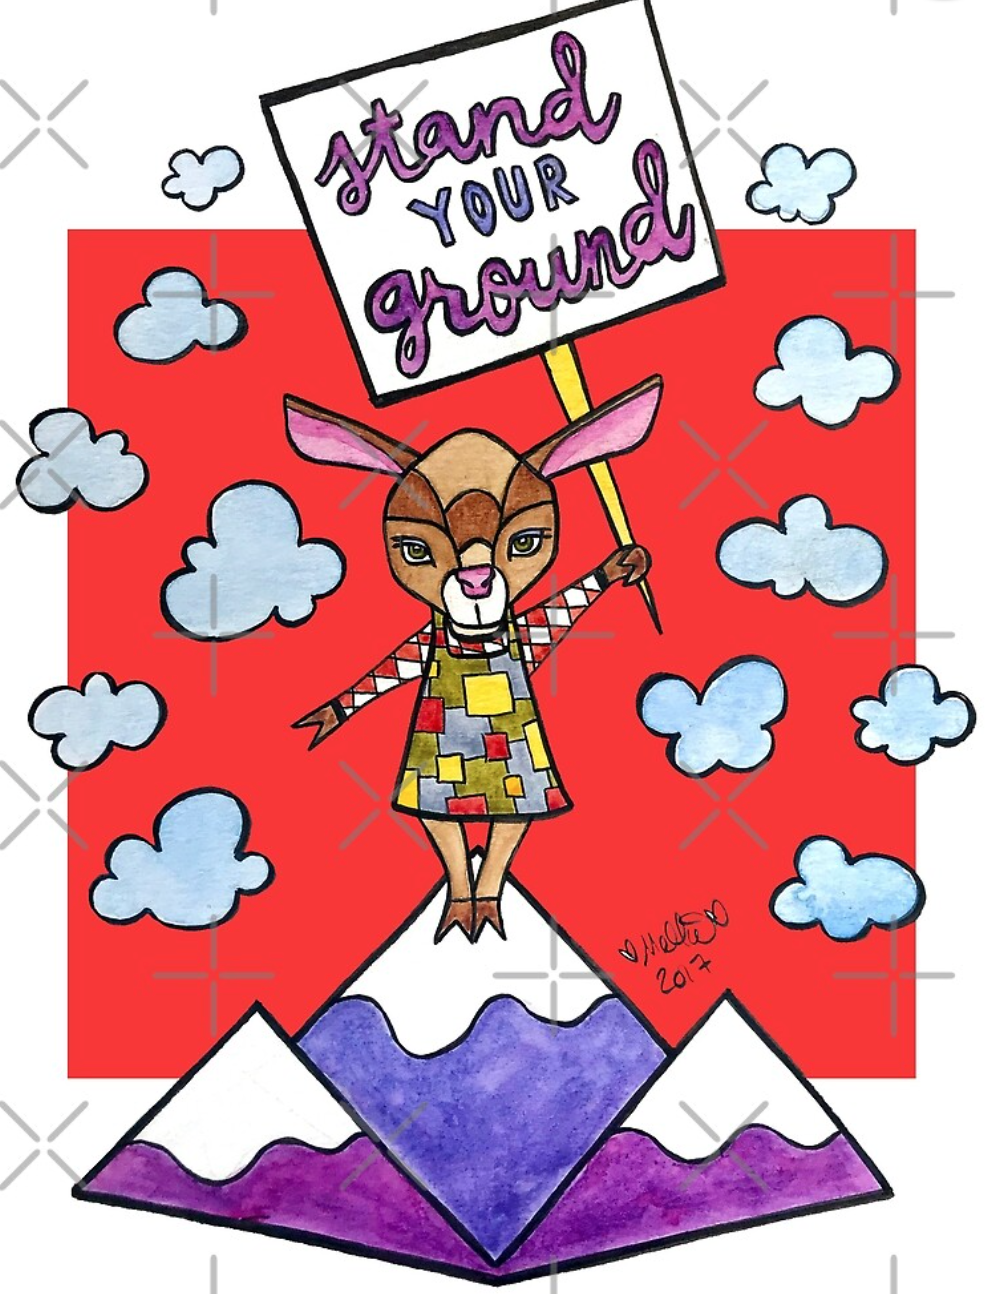 Animals of Inspiration: Stand Your Ground: Mountain Goat Illustration